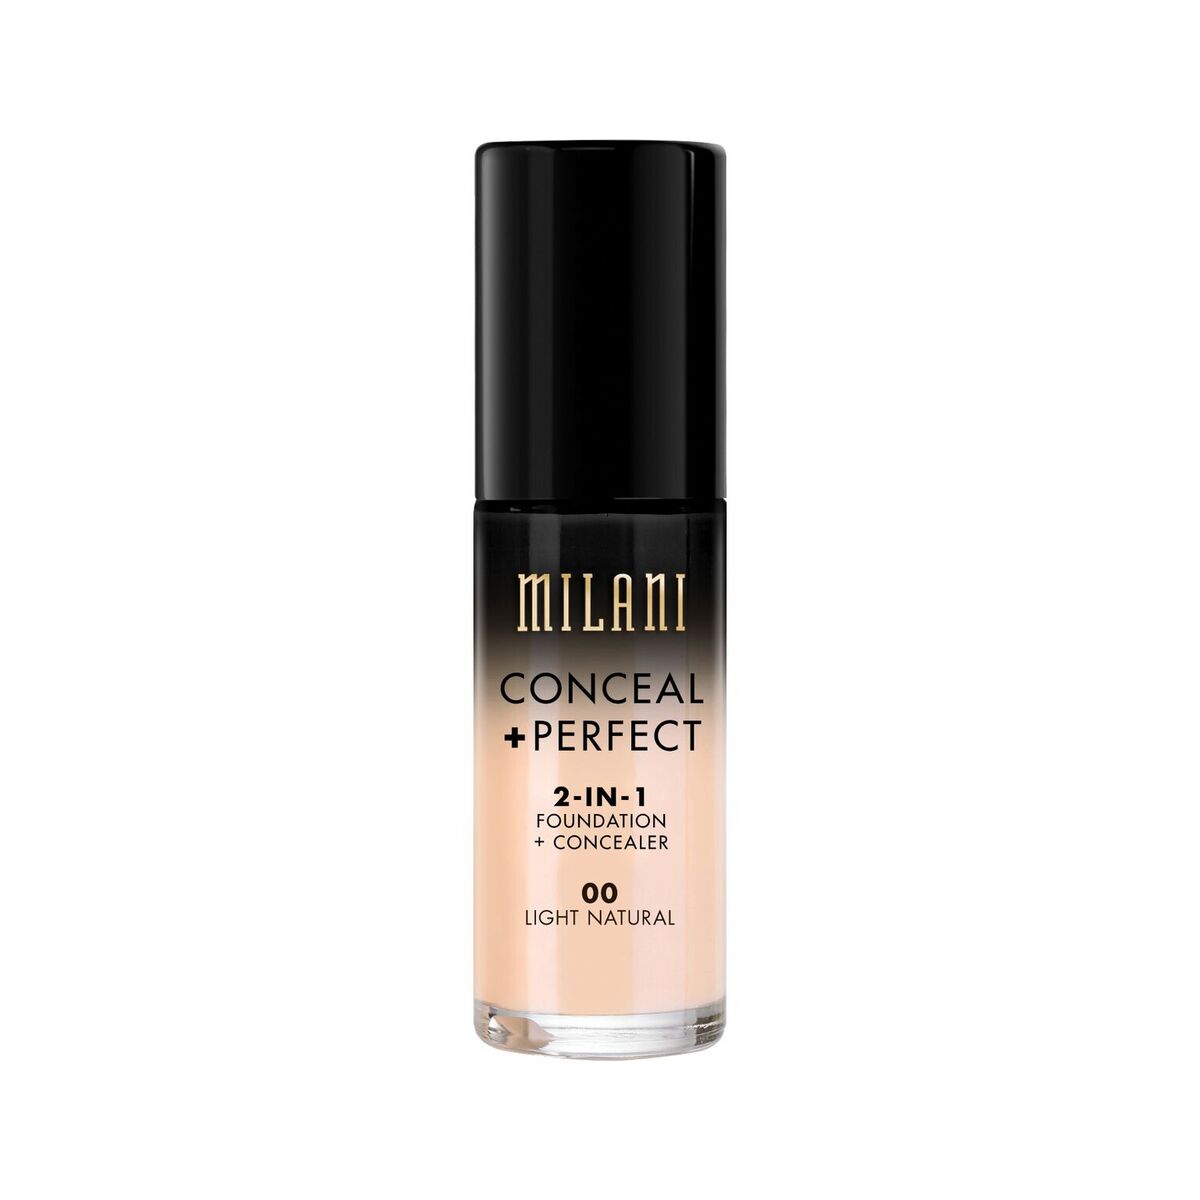 CONCEAL + PERFECT 2-IN-1 FOUNDATION + CONCEALER